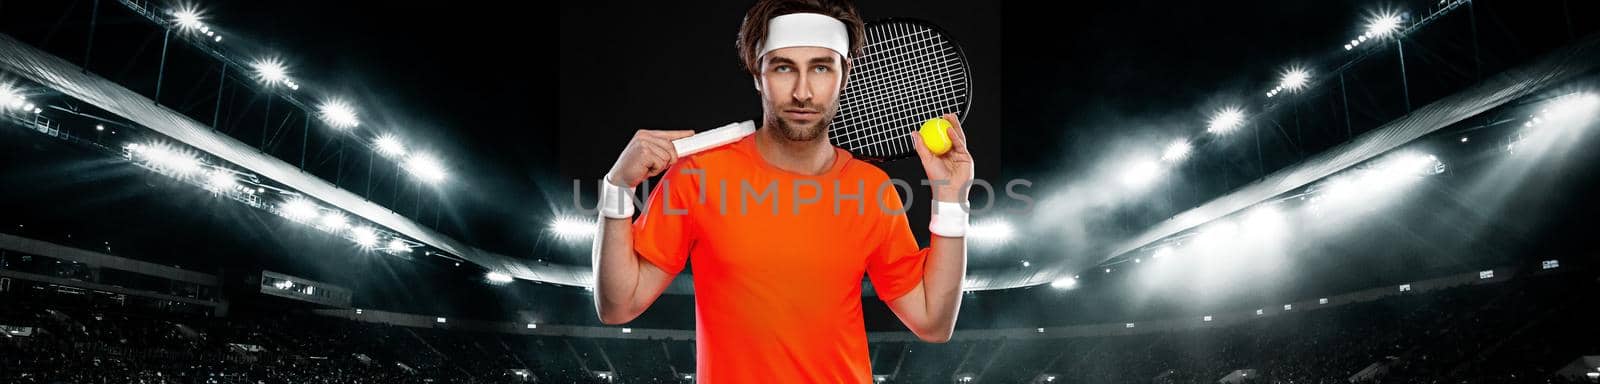 Tennis player with racket in white costume. Man athlete playing isolated on light background